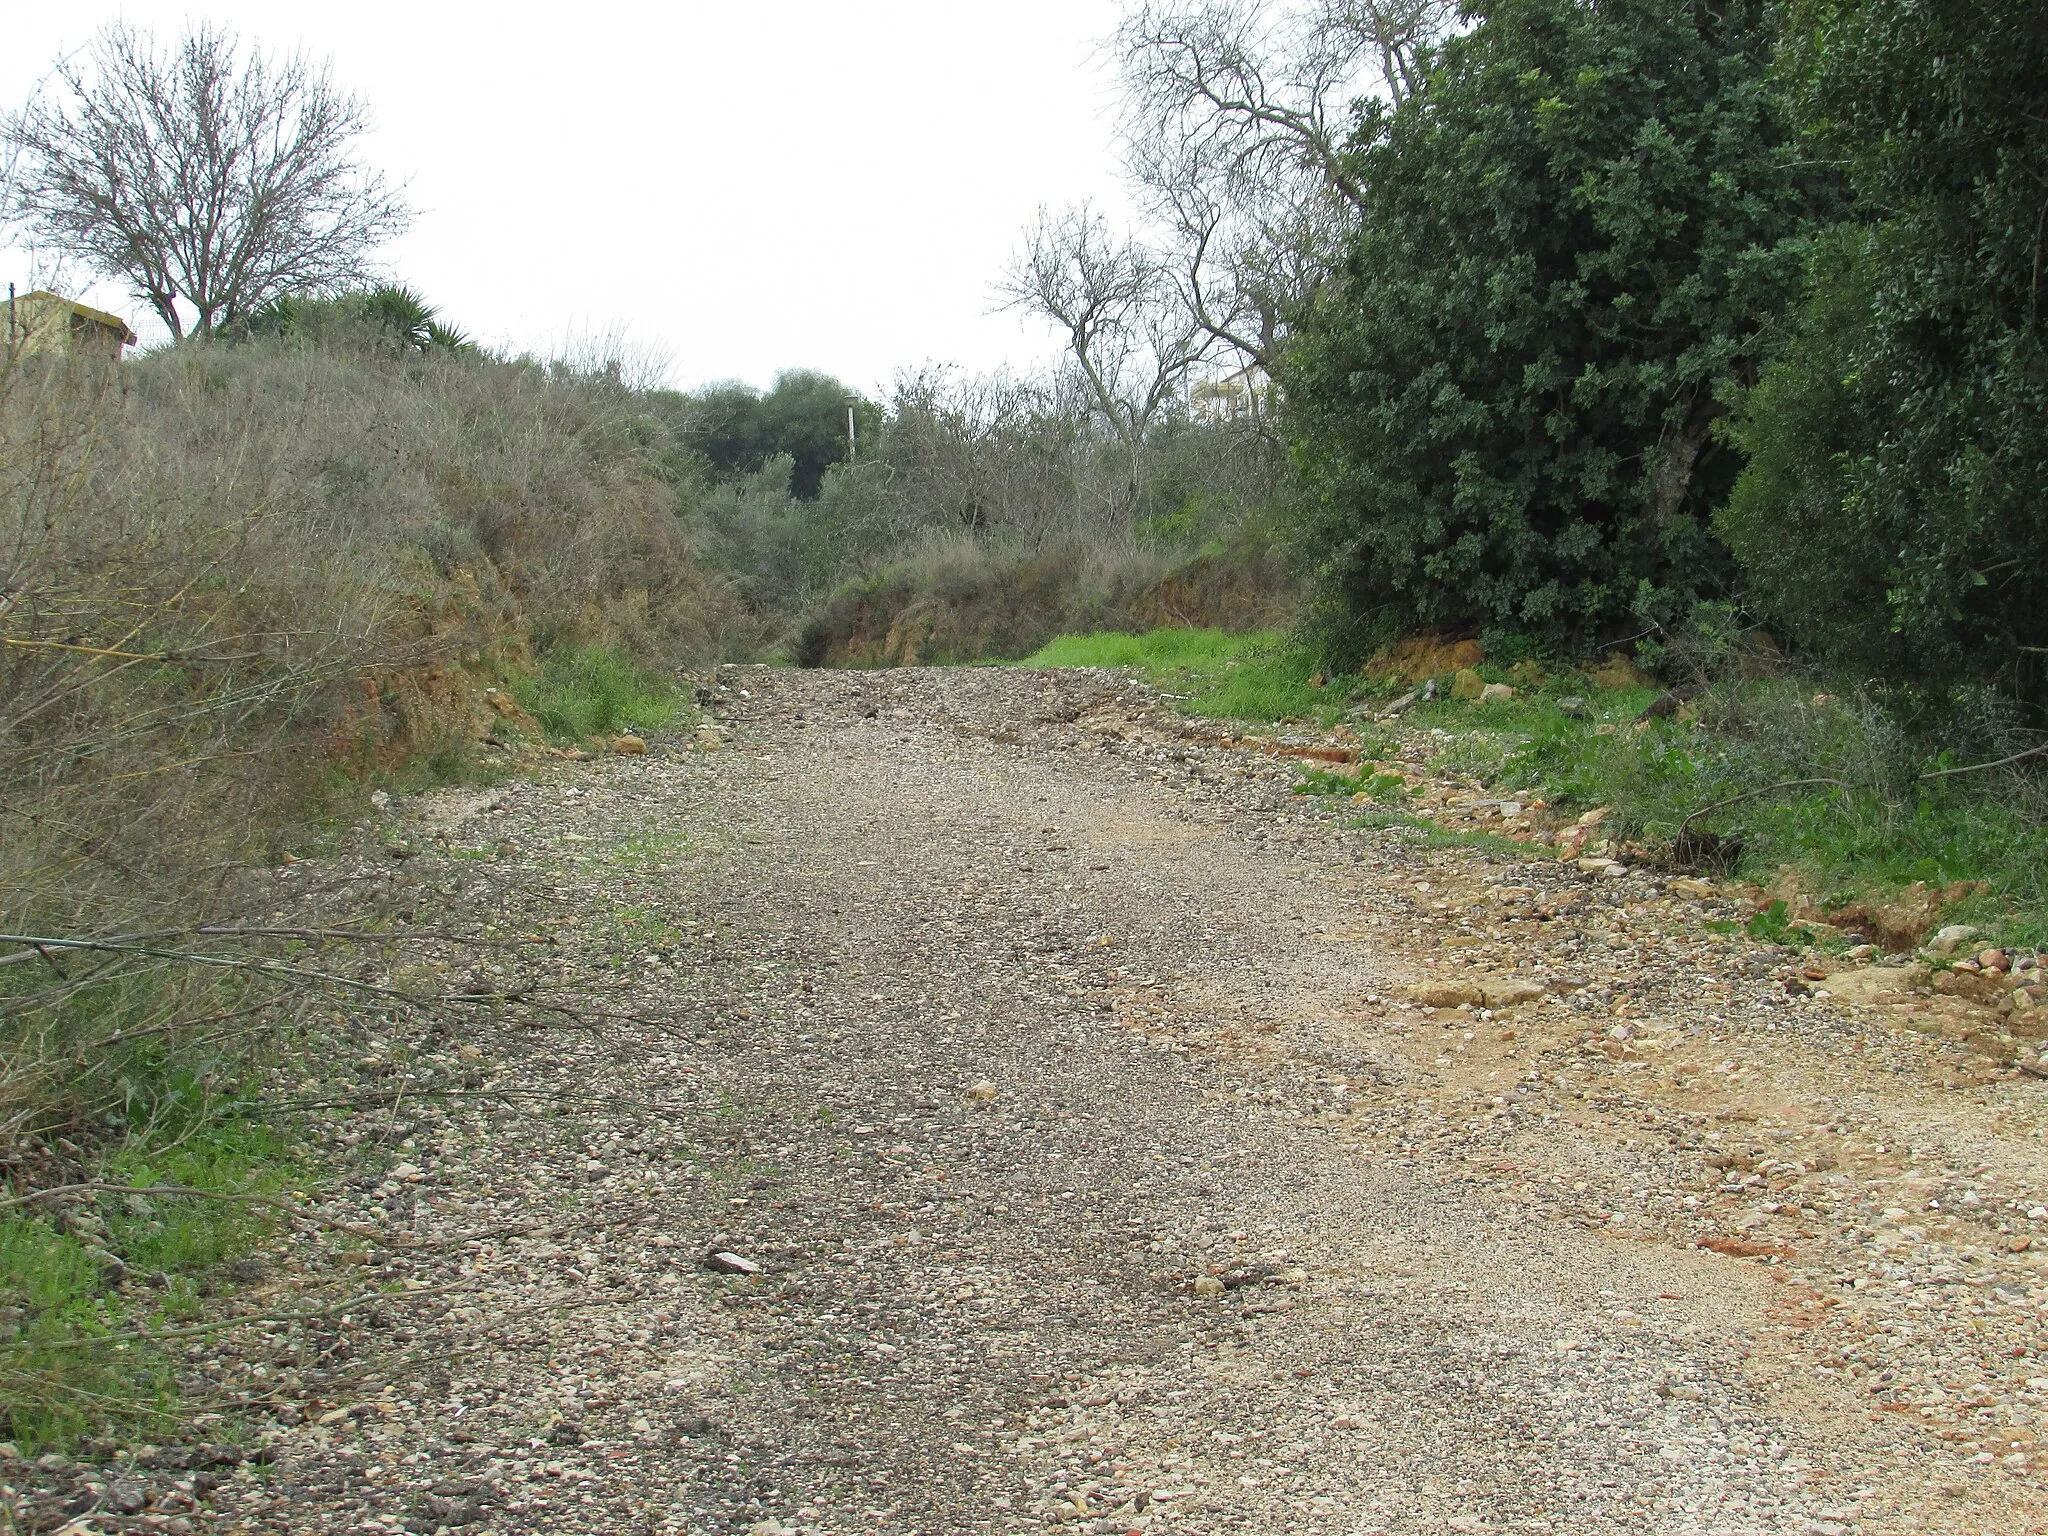 Photo showing: The unpaved section of the Caminho Quinta da Bolota in the city of Albufeira, Algarve, Portugal.